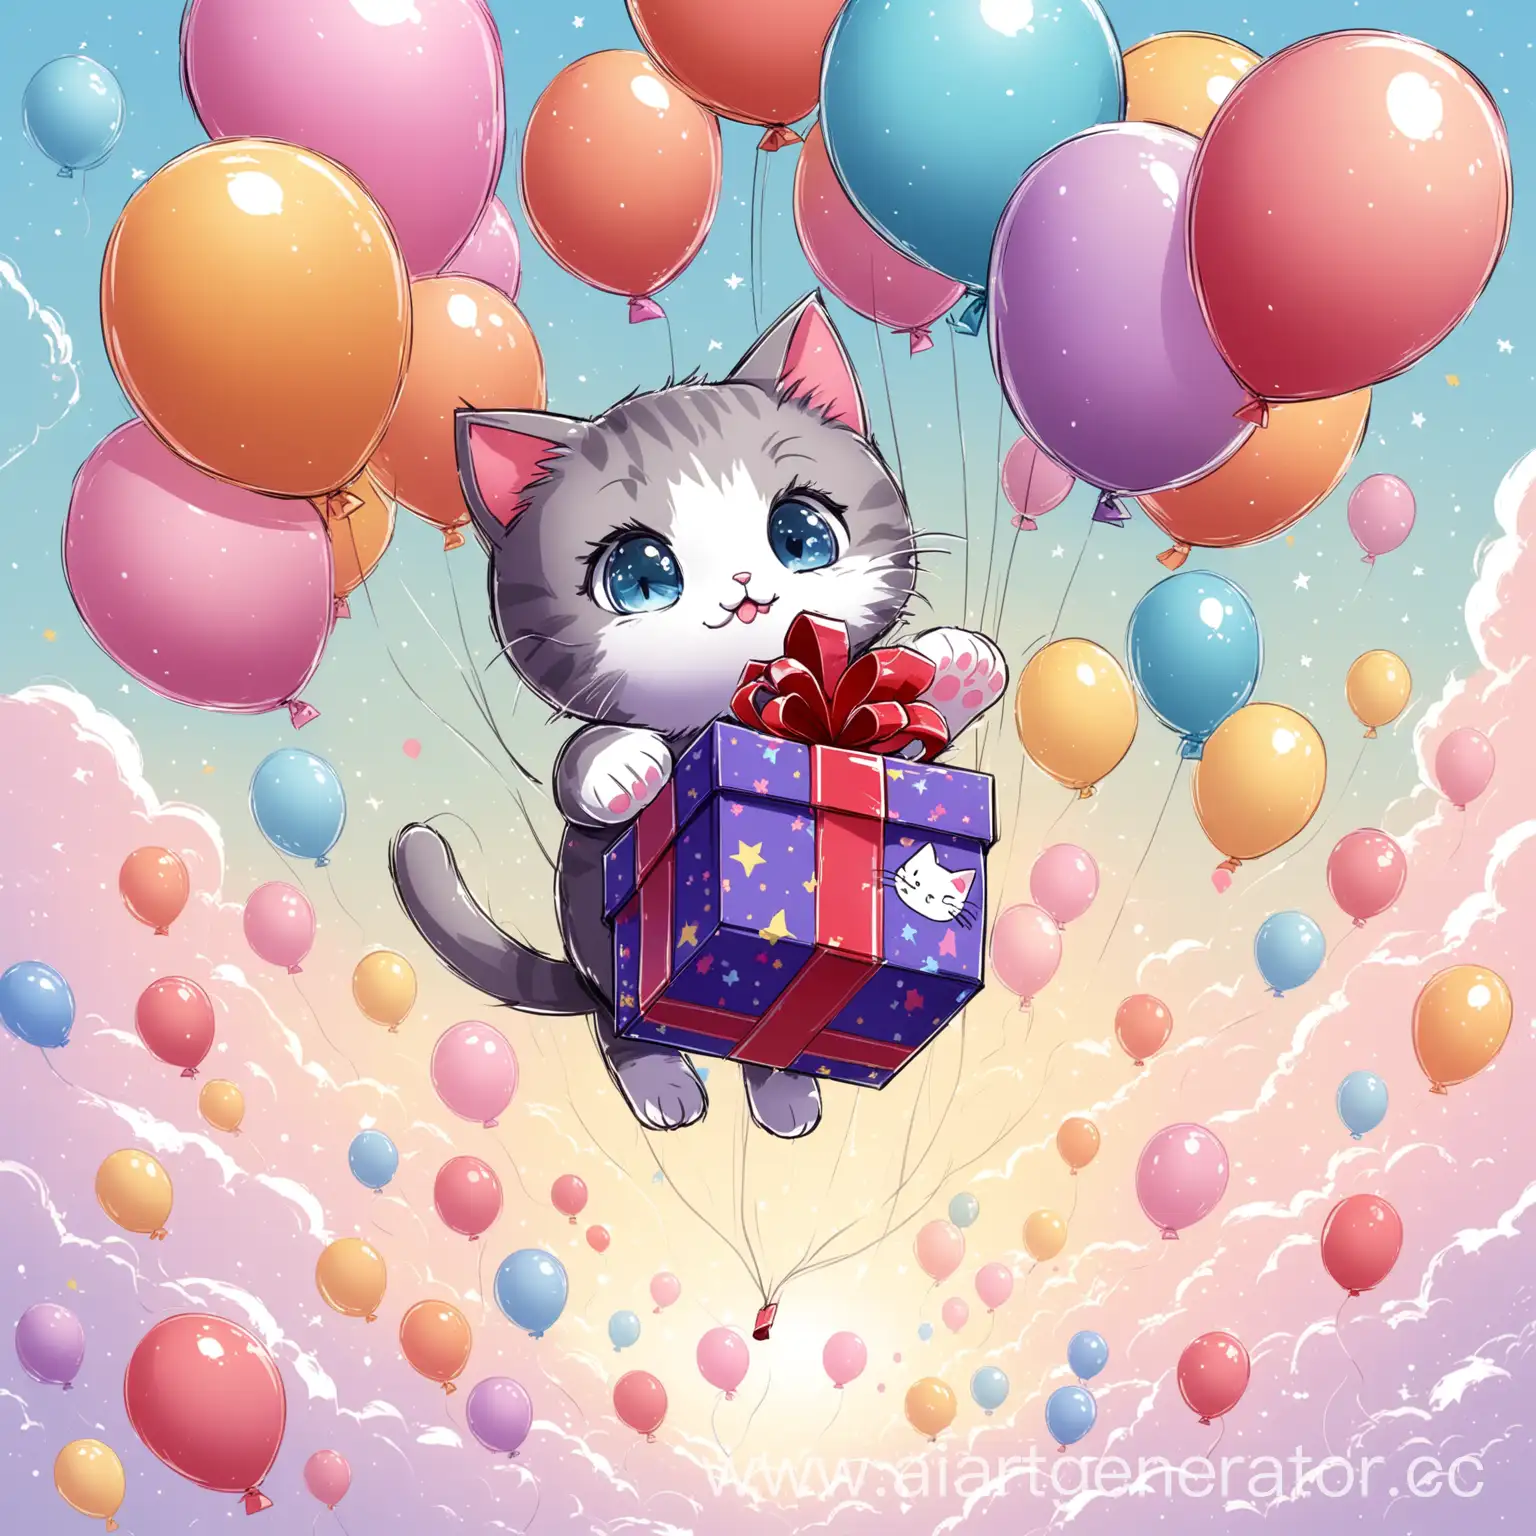 Adorable-Flying-Kitty-with-Balloons-and-Gift-Box